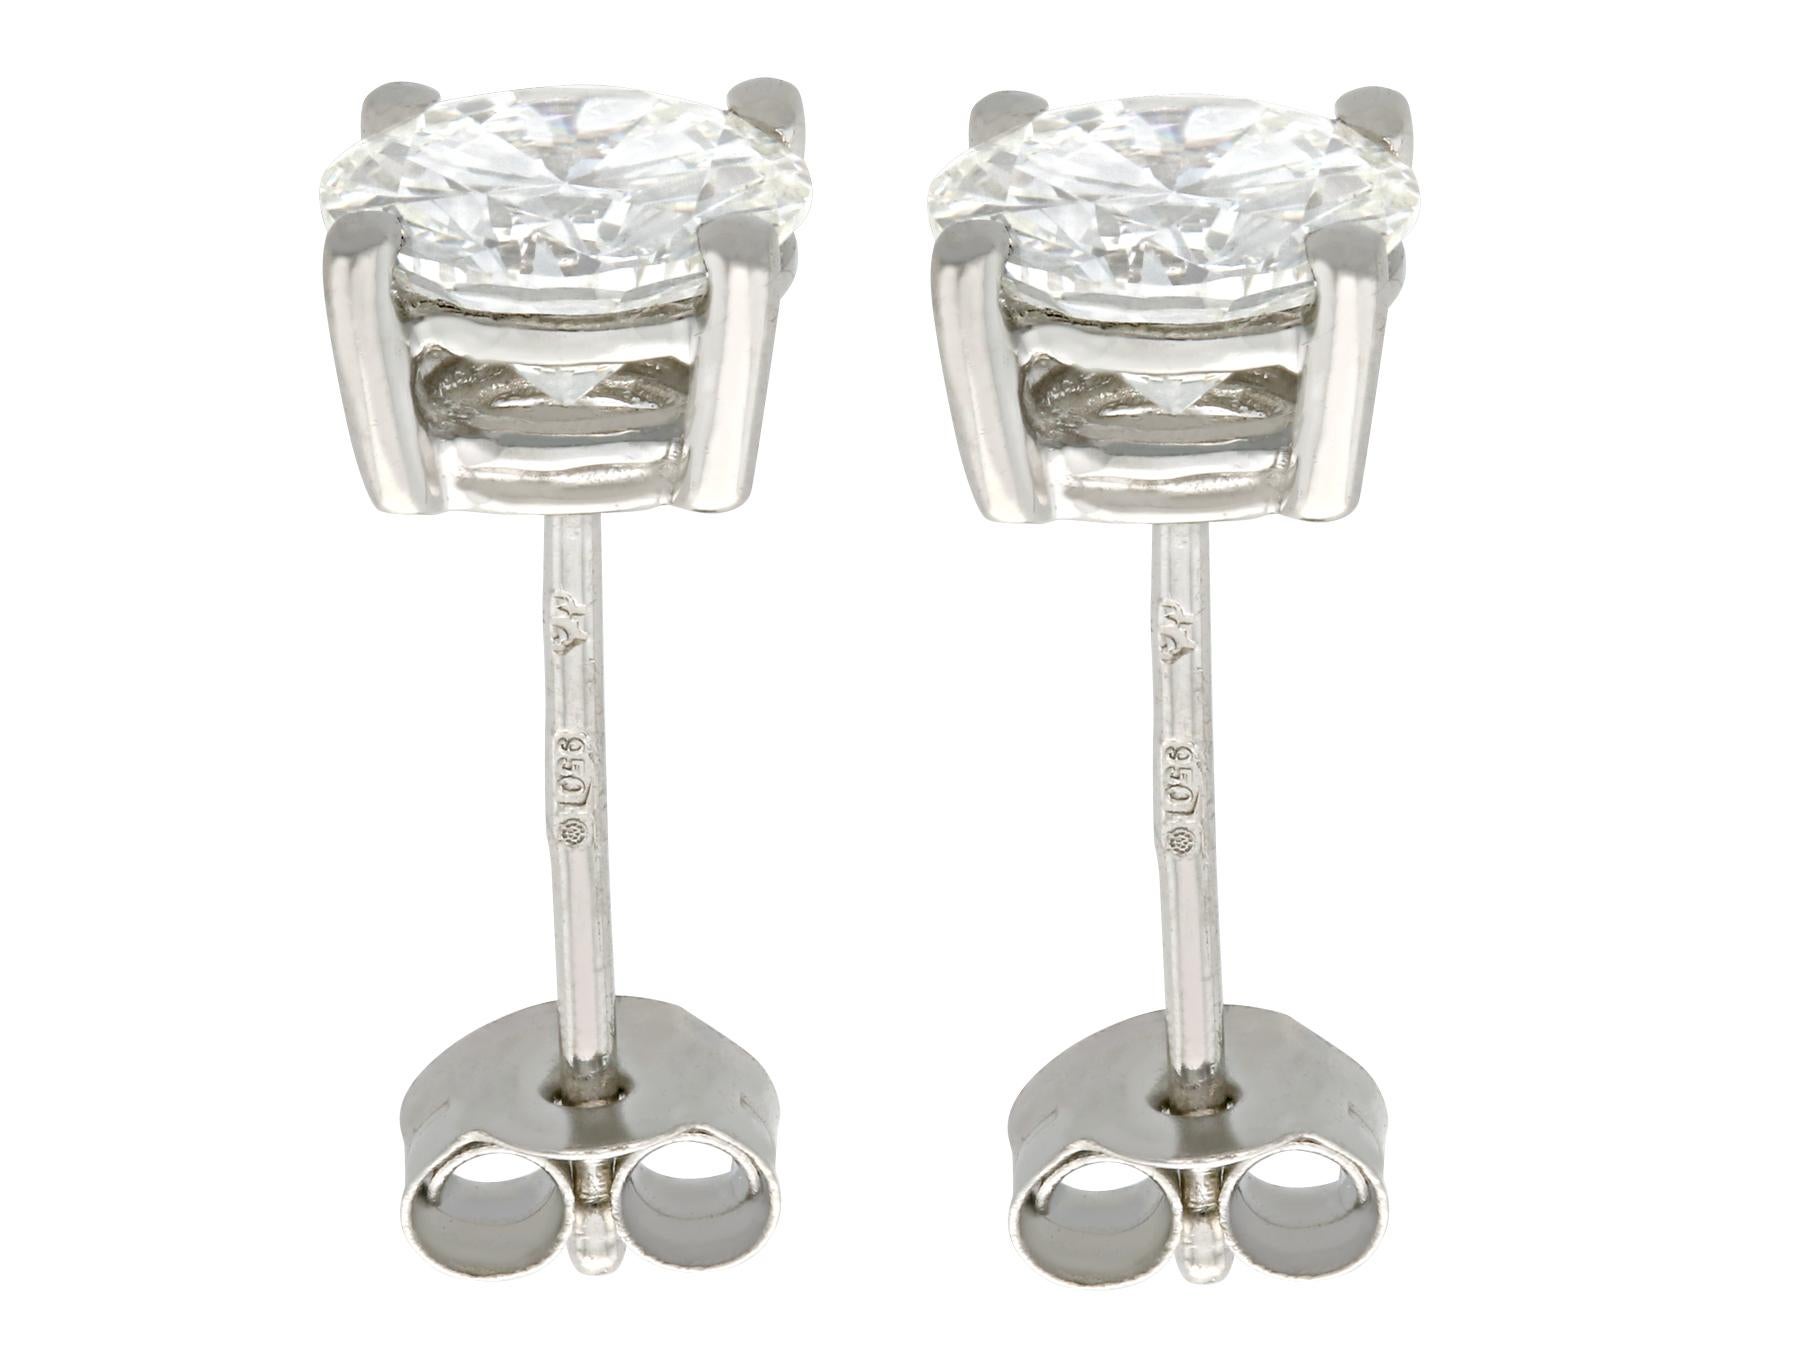 A stunning pair of antique 1920s 2.00 carat diamond and contemporary platinum stud earrings; part of our diverse diamond jewelry and estate jewelry collections

These stunning, fine and impressive diamond stud earrings have been crafted in